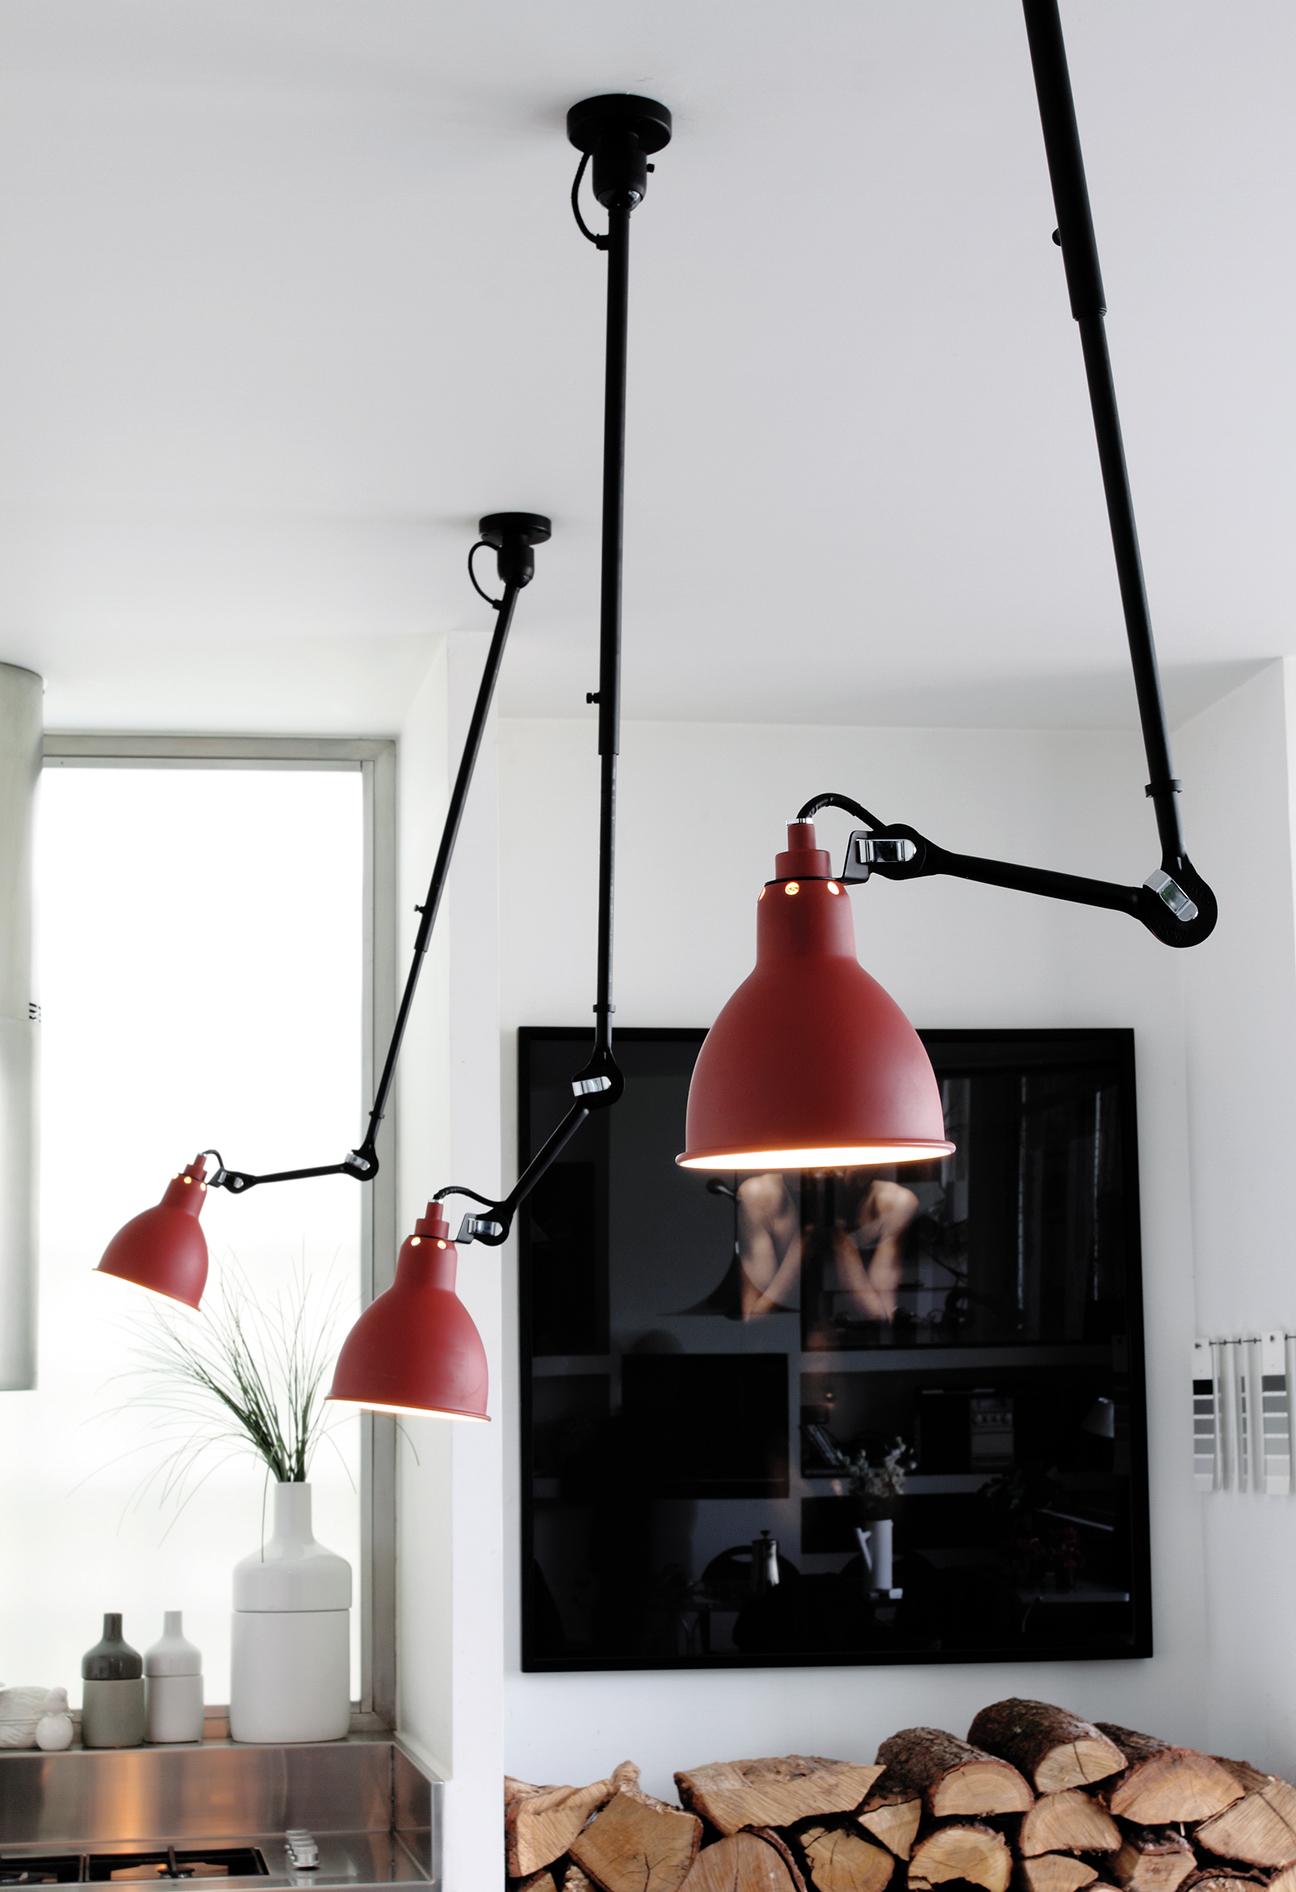 Steel DCW Editions La Lampe Gras N°302 Pendant Light in Black Arm and Copper Shade For Sale